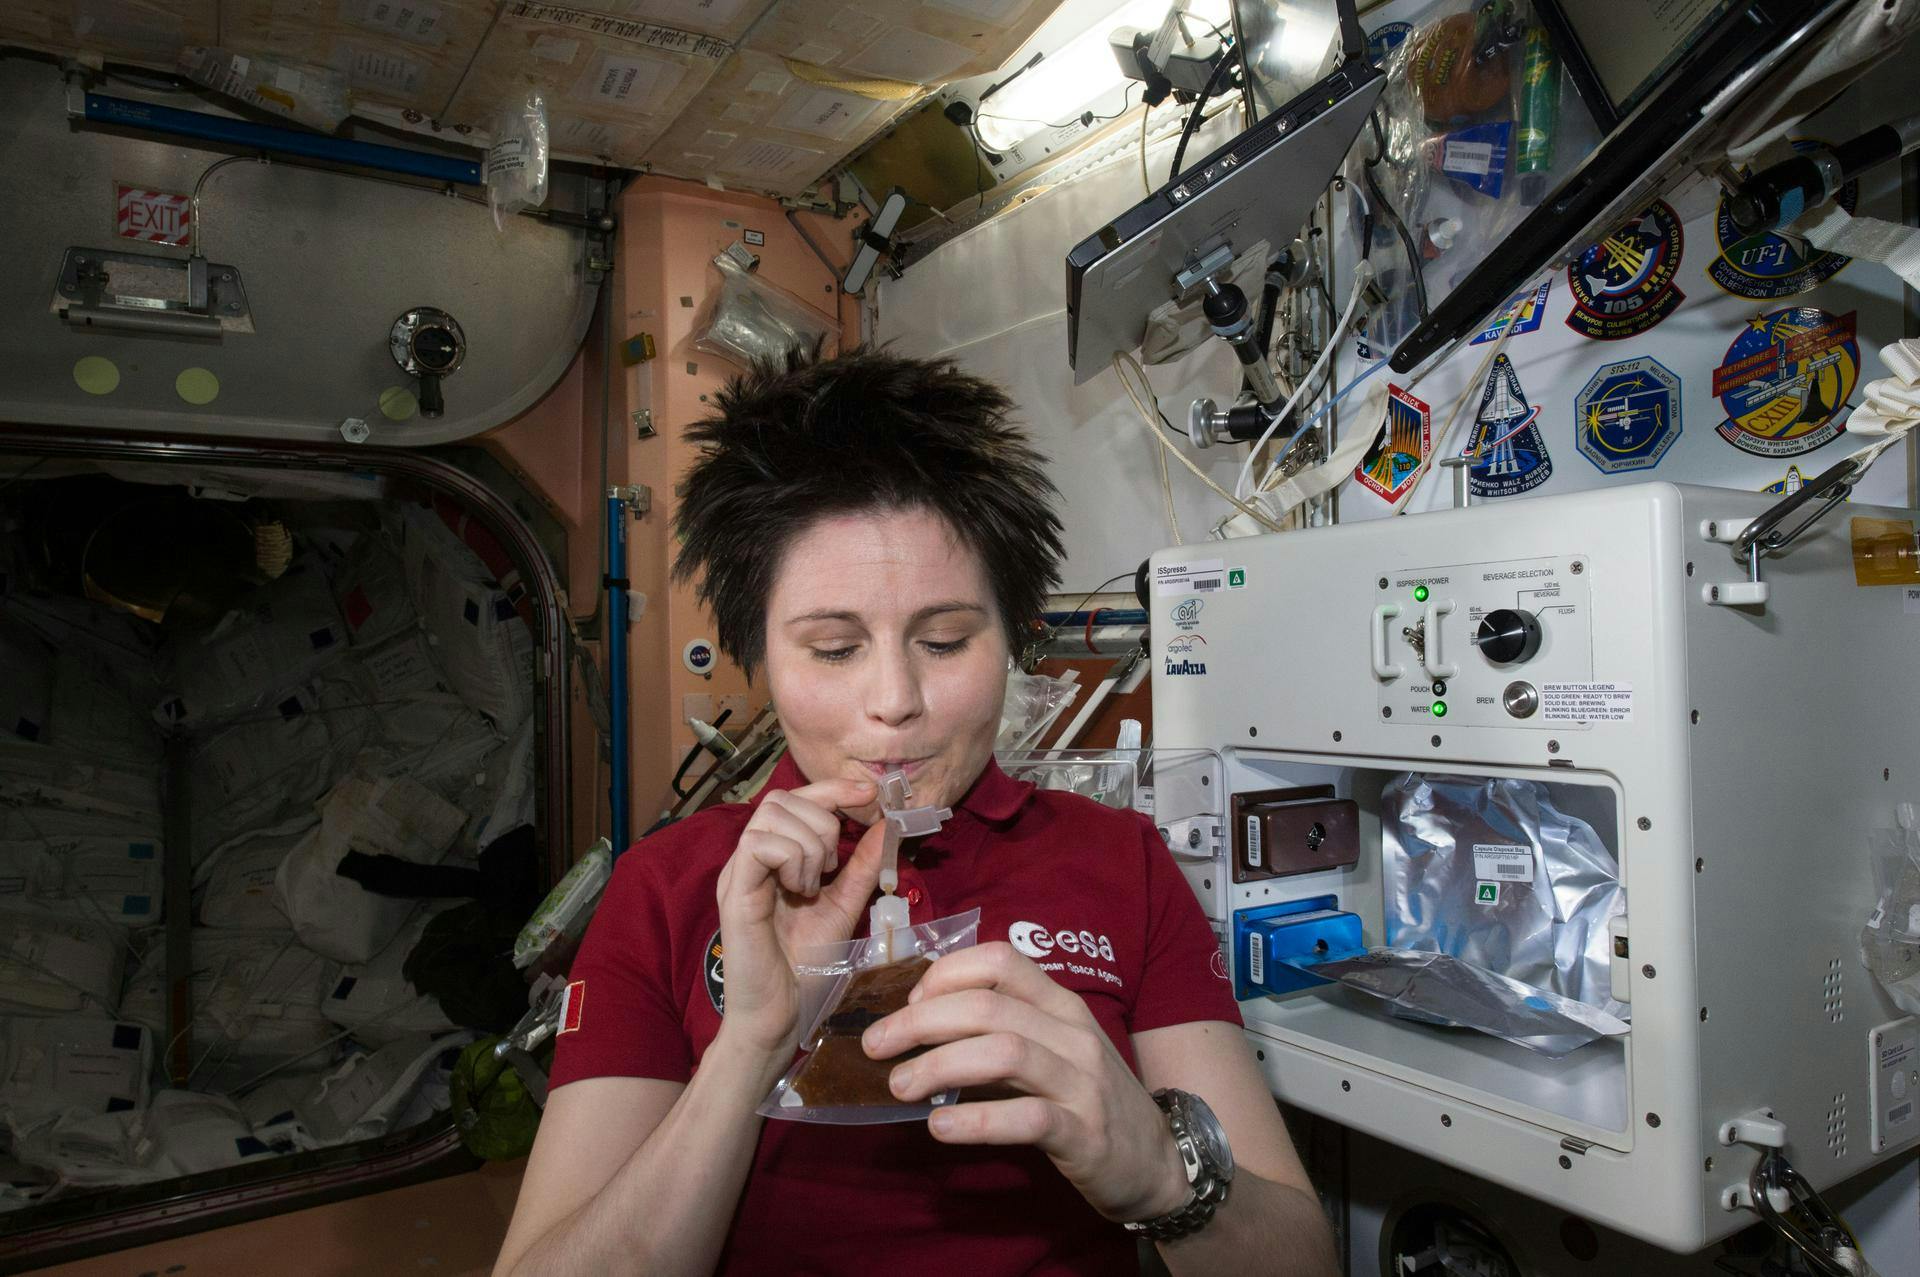 ESA (European Space Agency) astronaut Samantha Cristoforetti enjoys her first drink from the new ISSpresso machine. The espresso device allows crews to make tea, coffee, broth, or other hot beverages they might enjoy.